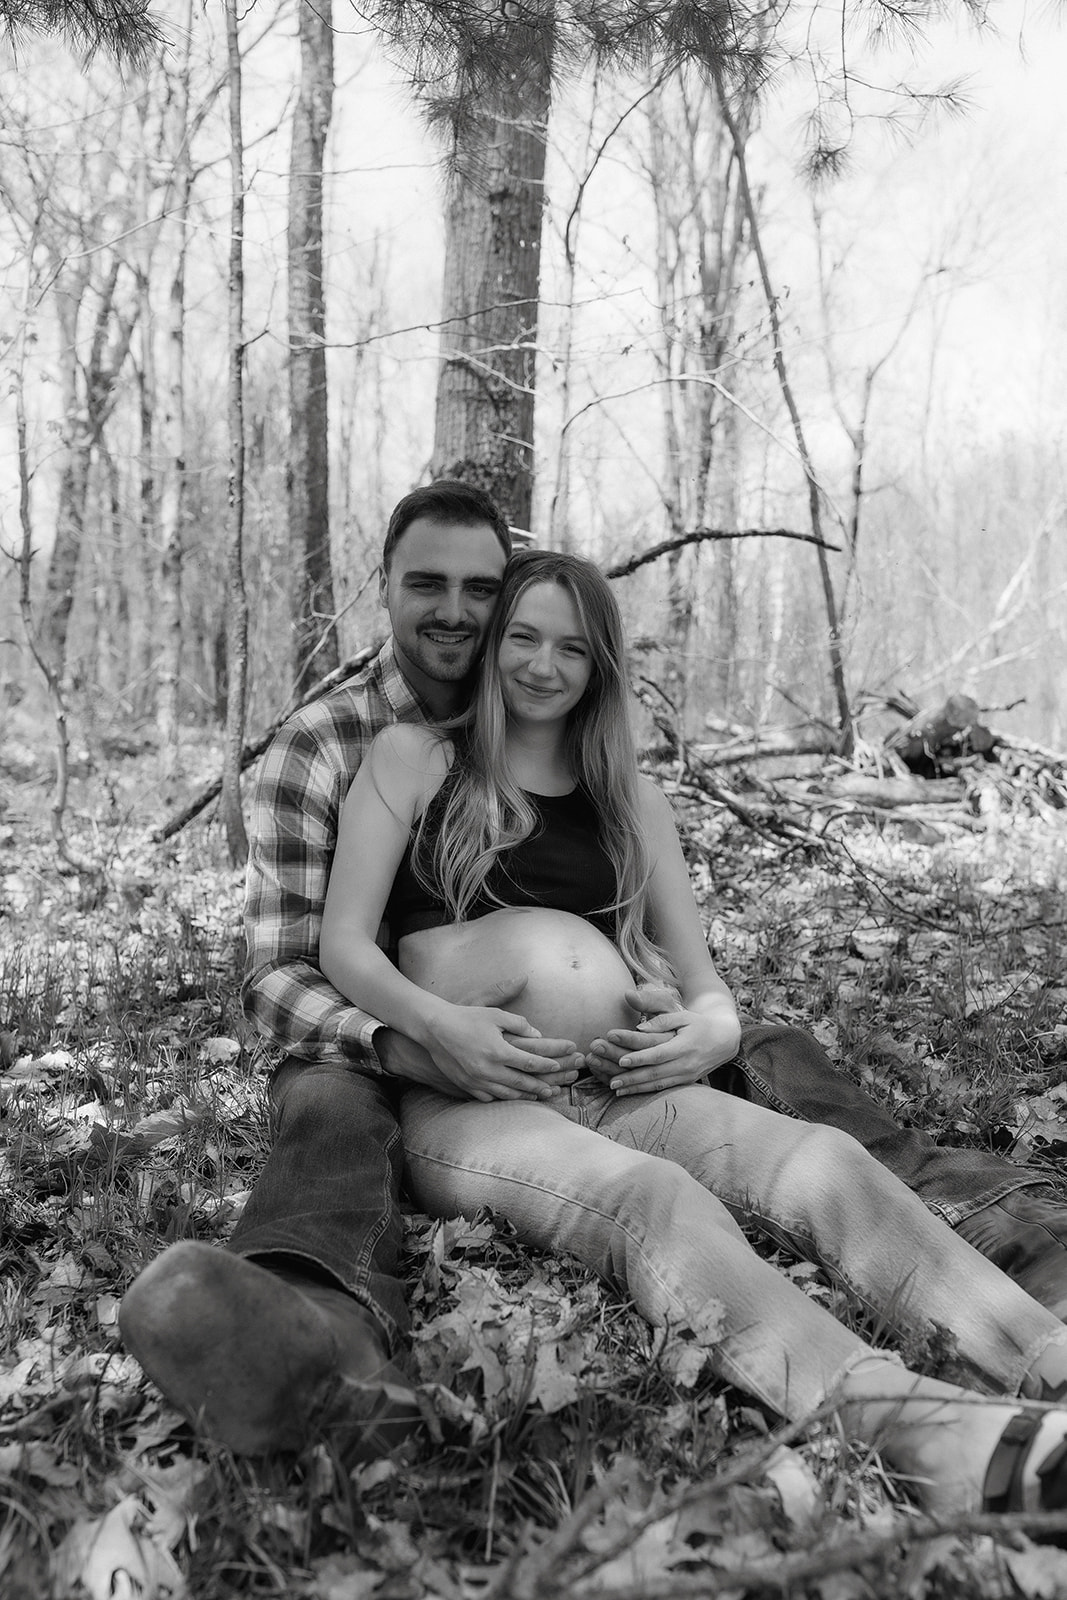 Future parents pose intimately together during their dreamy upstate New York maternity photos 